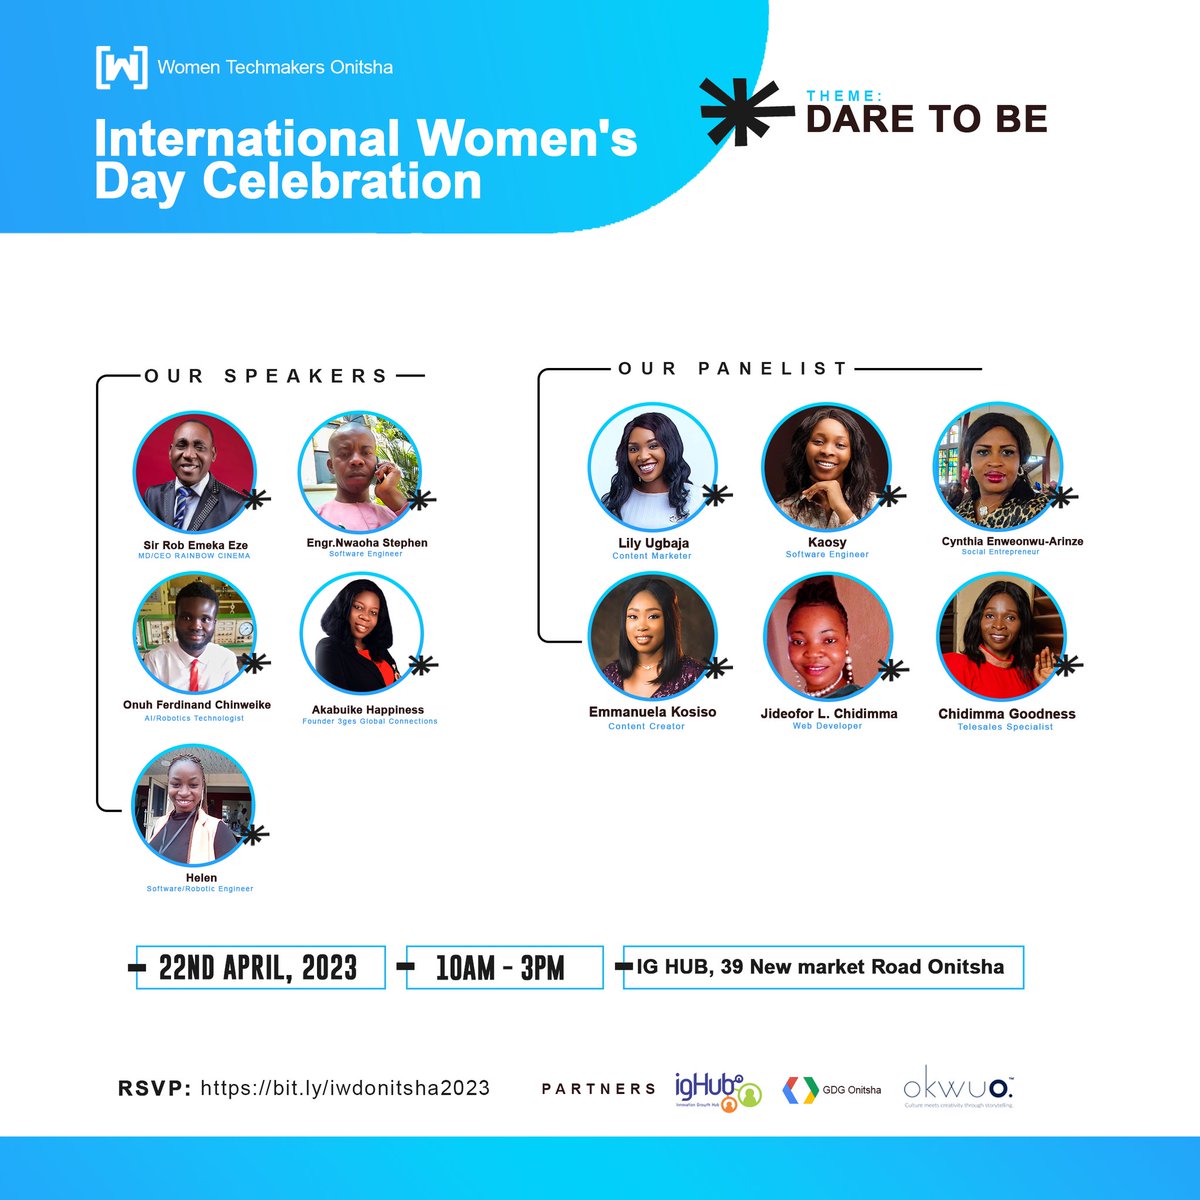 youtu.be/RYCUci0Itfo WTM Onitsha celebrates international Women's day please RSVP here to reserve your spot bit.ly/iwdonitsha2023